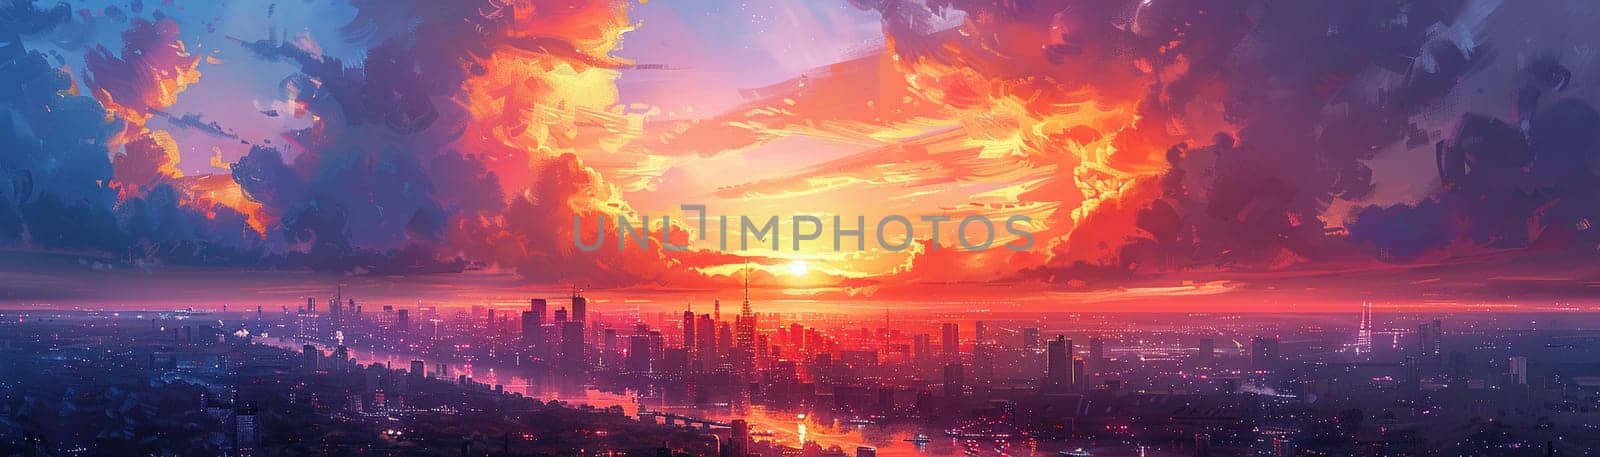 Sunset vista over the city illustrated with warm, glowing pastels and soft, blending techniques.